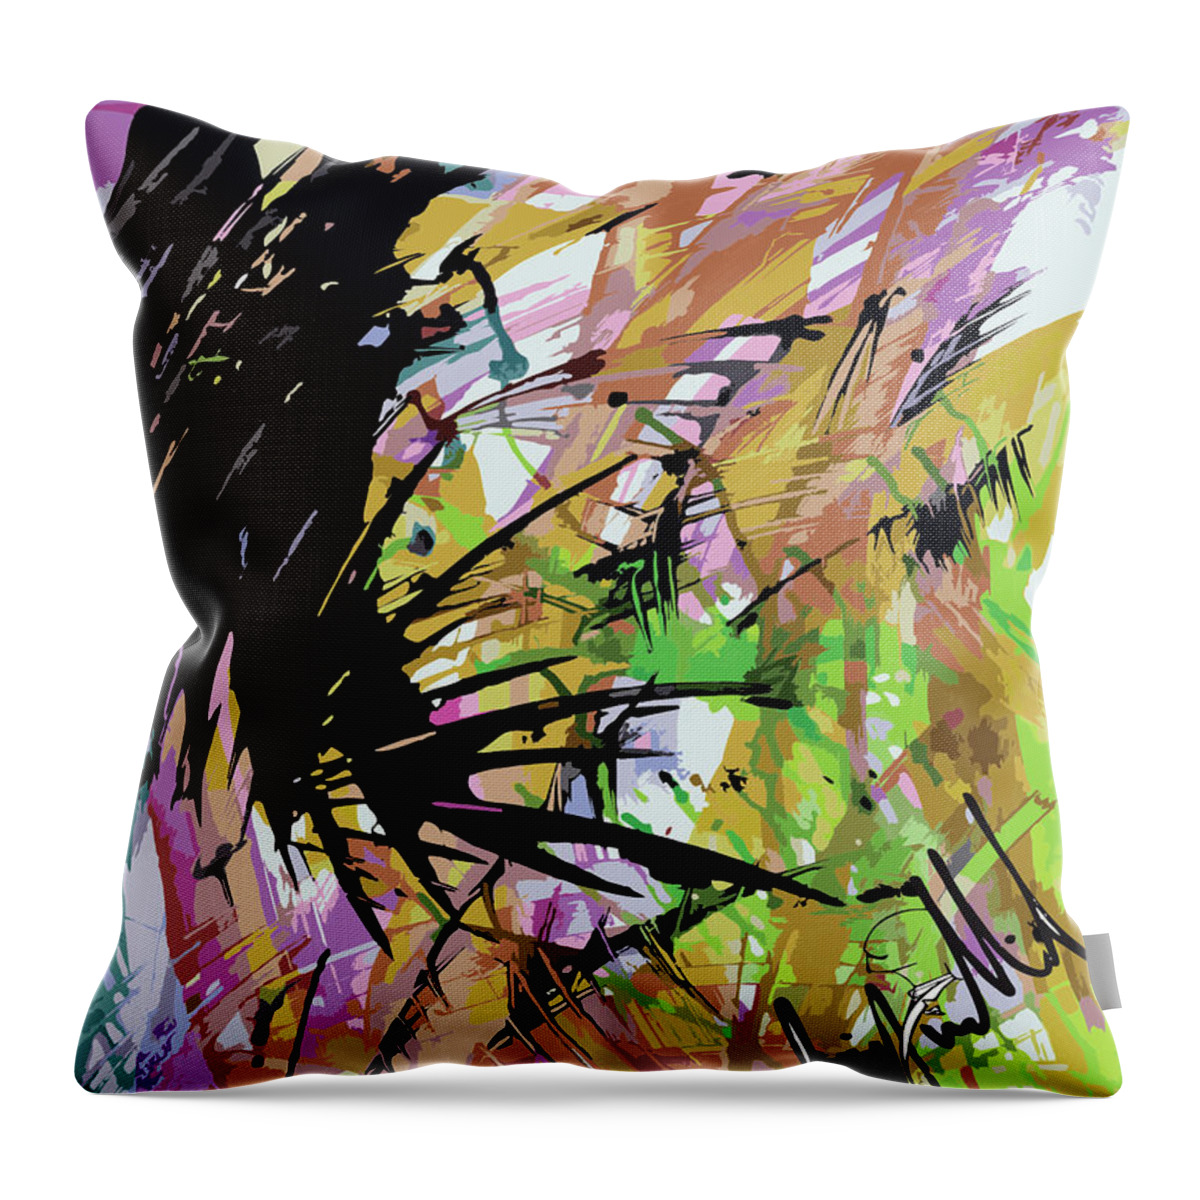  Throw Pillow featuring the digital art Spot #1 by Jimmy Williams